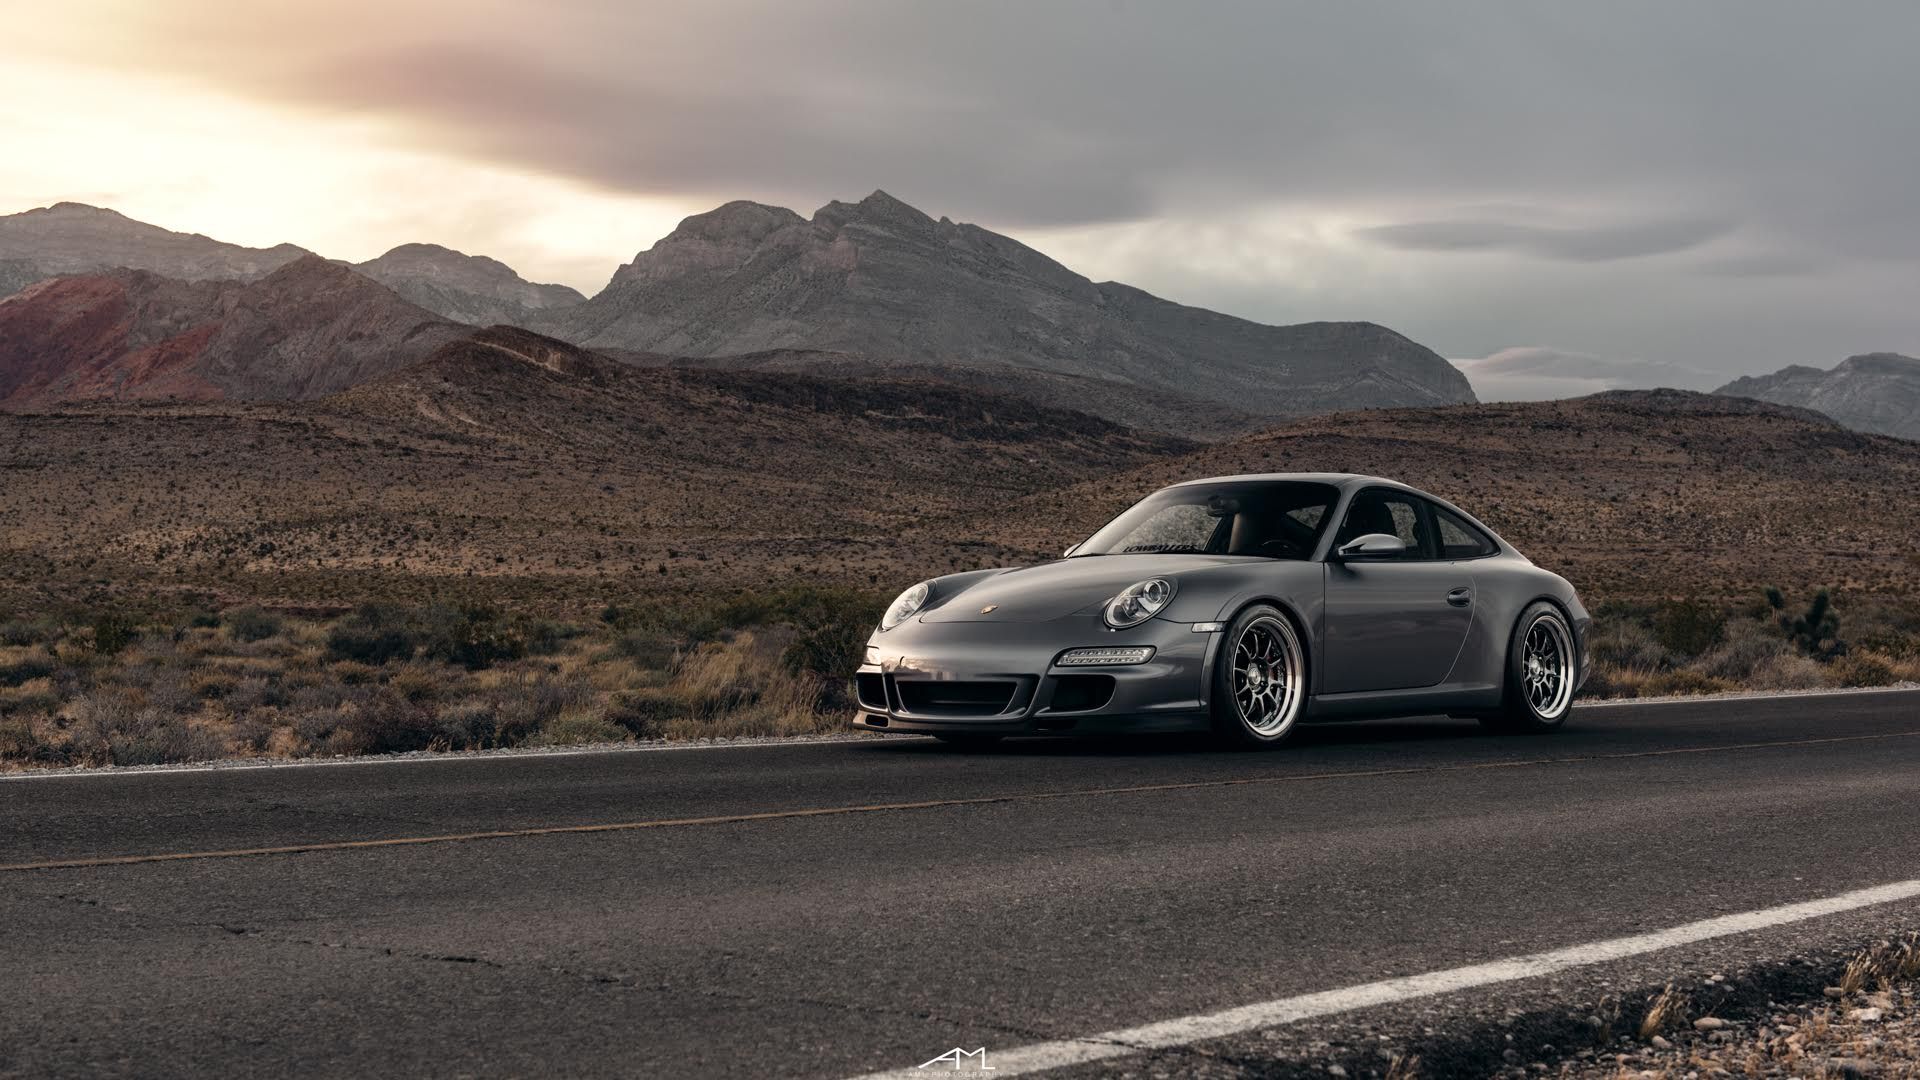 Your Ridiculously Awesome Porsche 997 Carrera S Wallpaper Is Here. HD background, Wallpaper, Uhd wallpaper